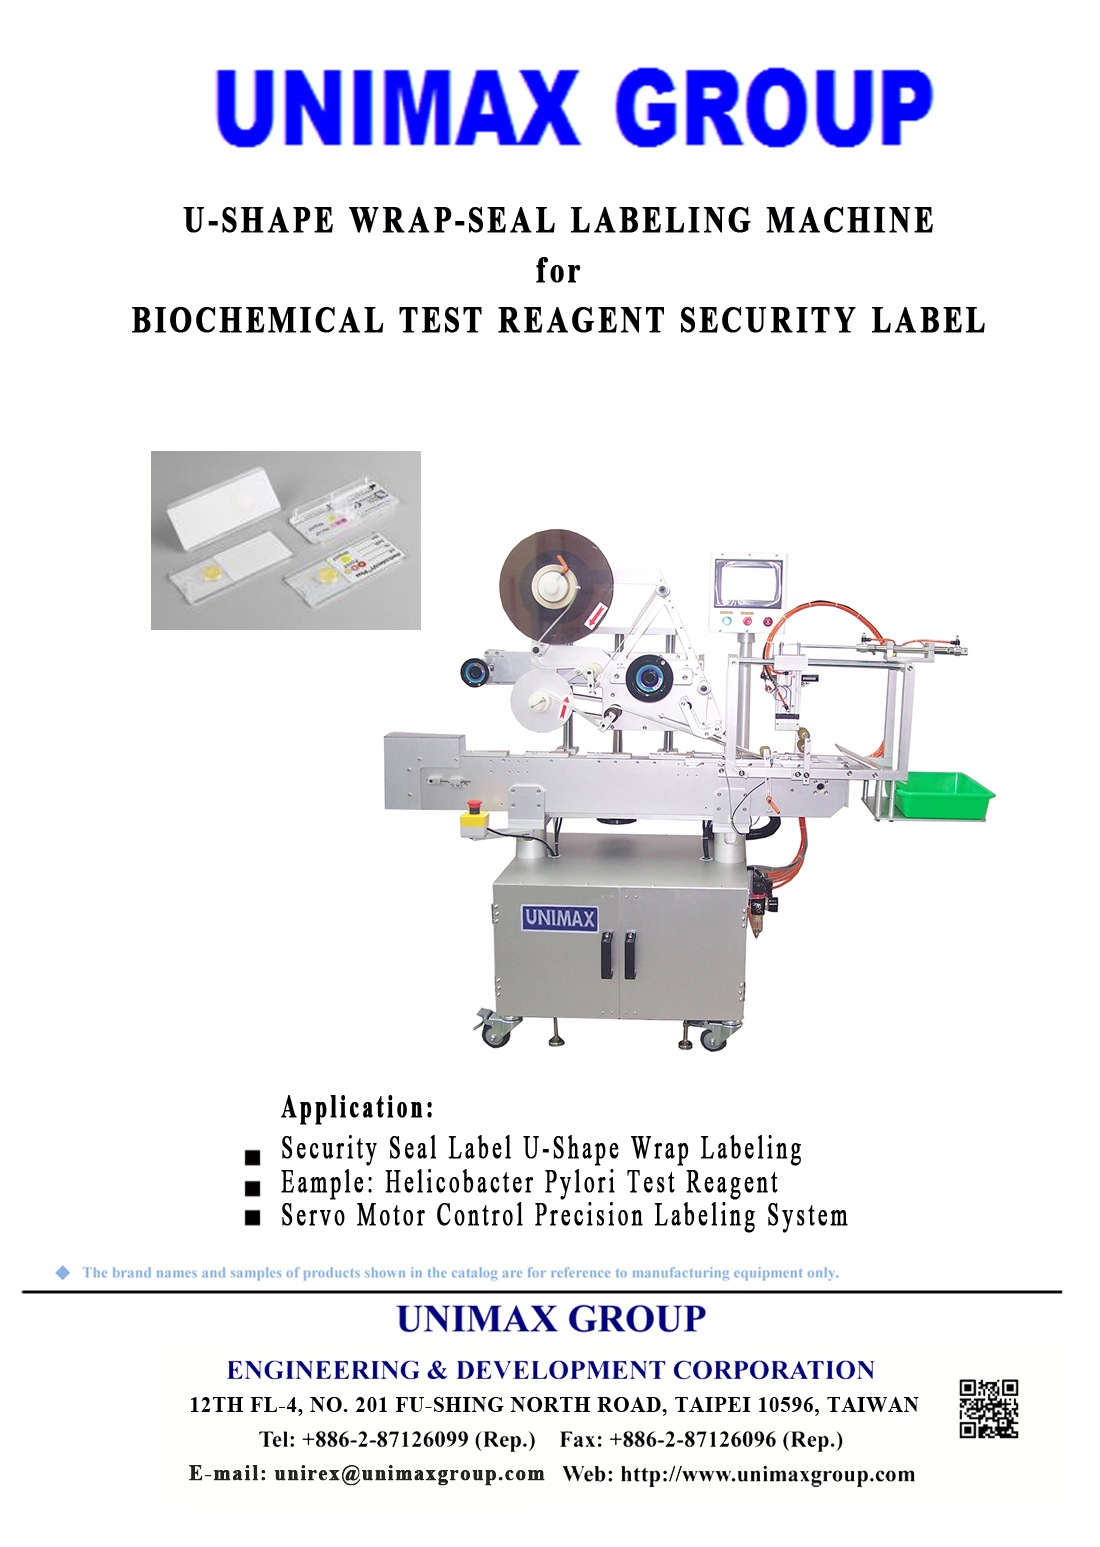 U-Shape Wrap-Seal Labeling Machine for Biochemical Test Reagent Security Label